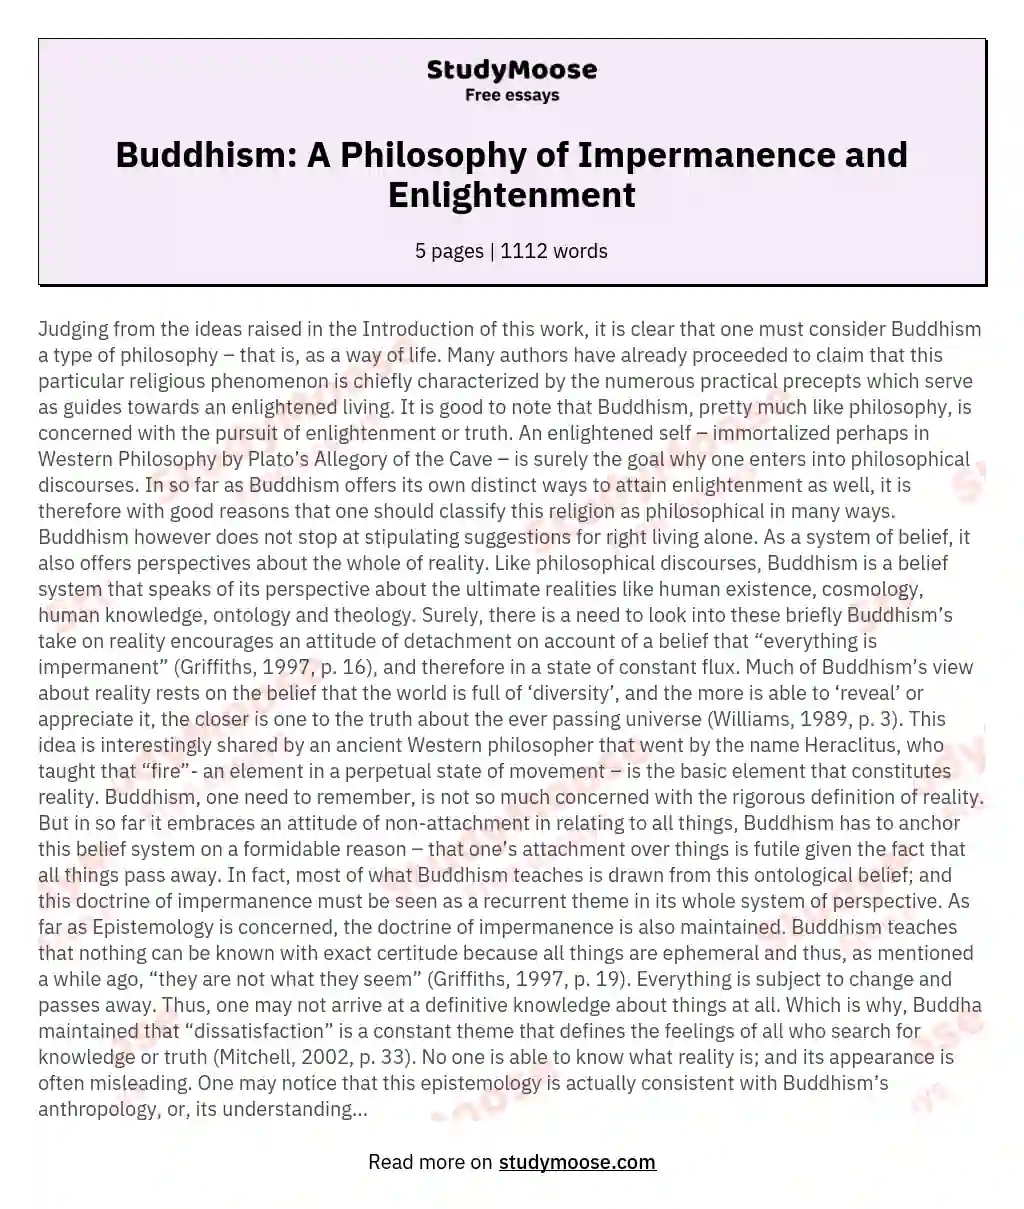 Buddhism: A Philosophy of Impermanence and Enlightenment essay